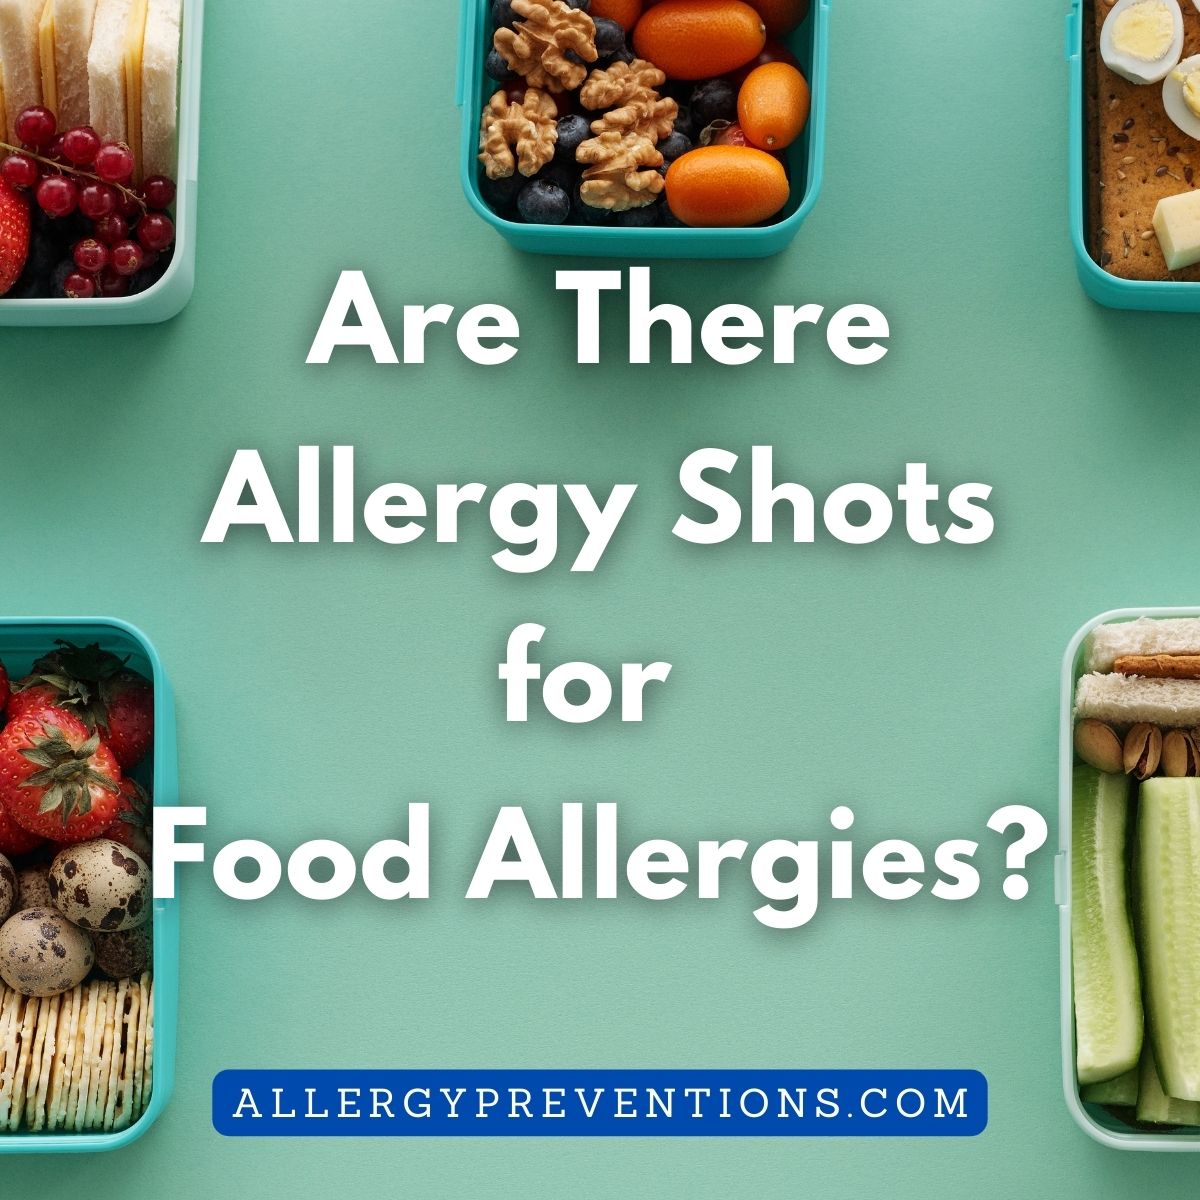 Are there allergy shots for food allergies?